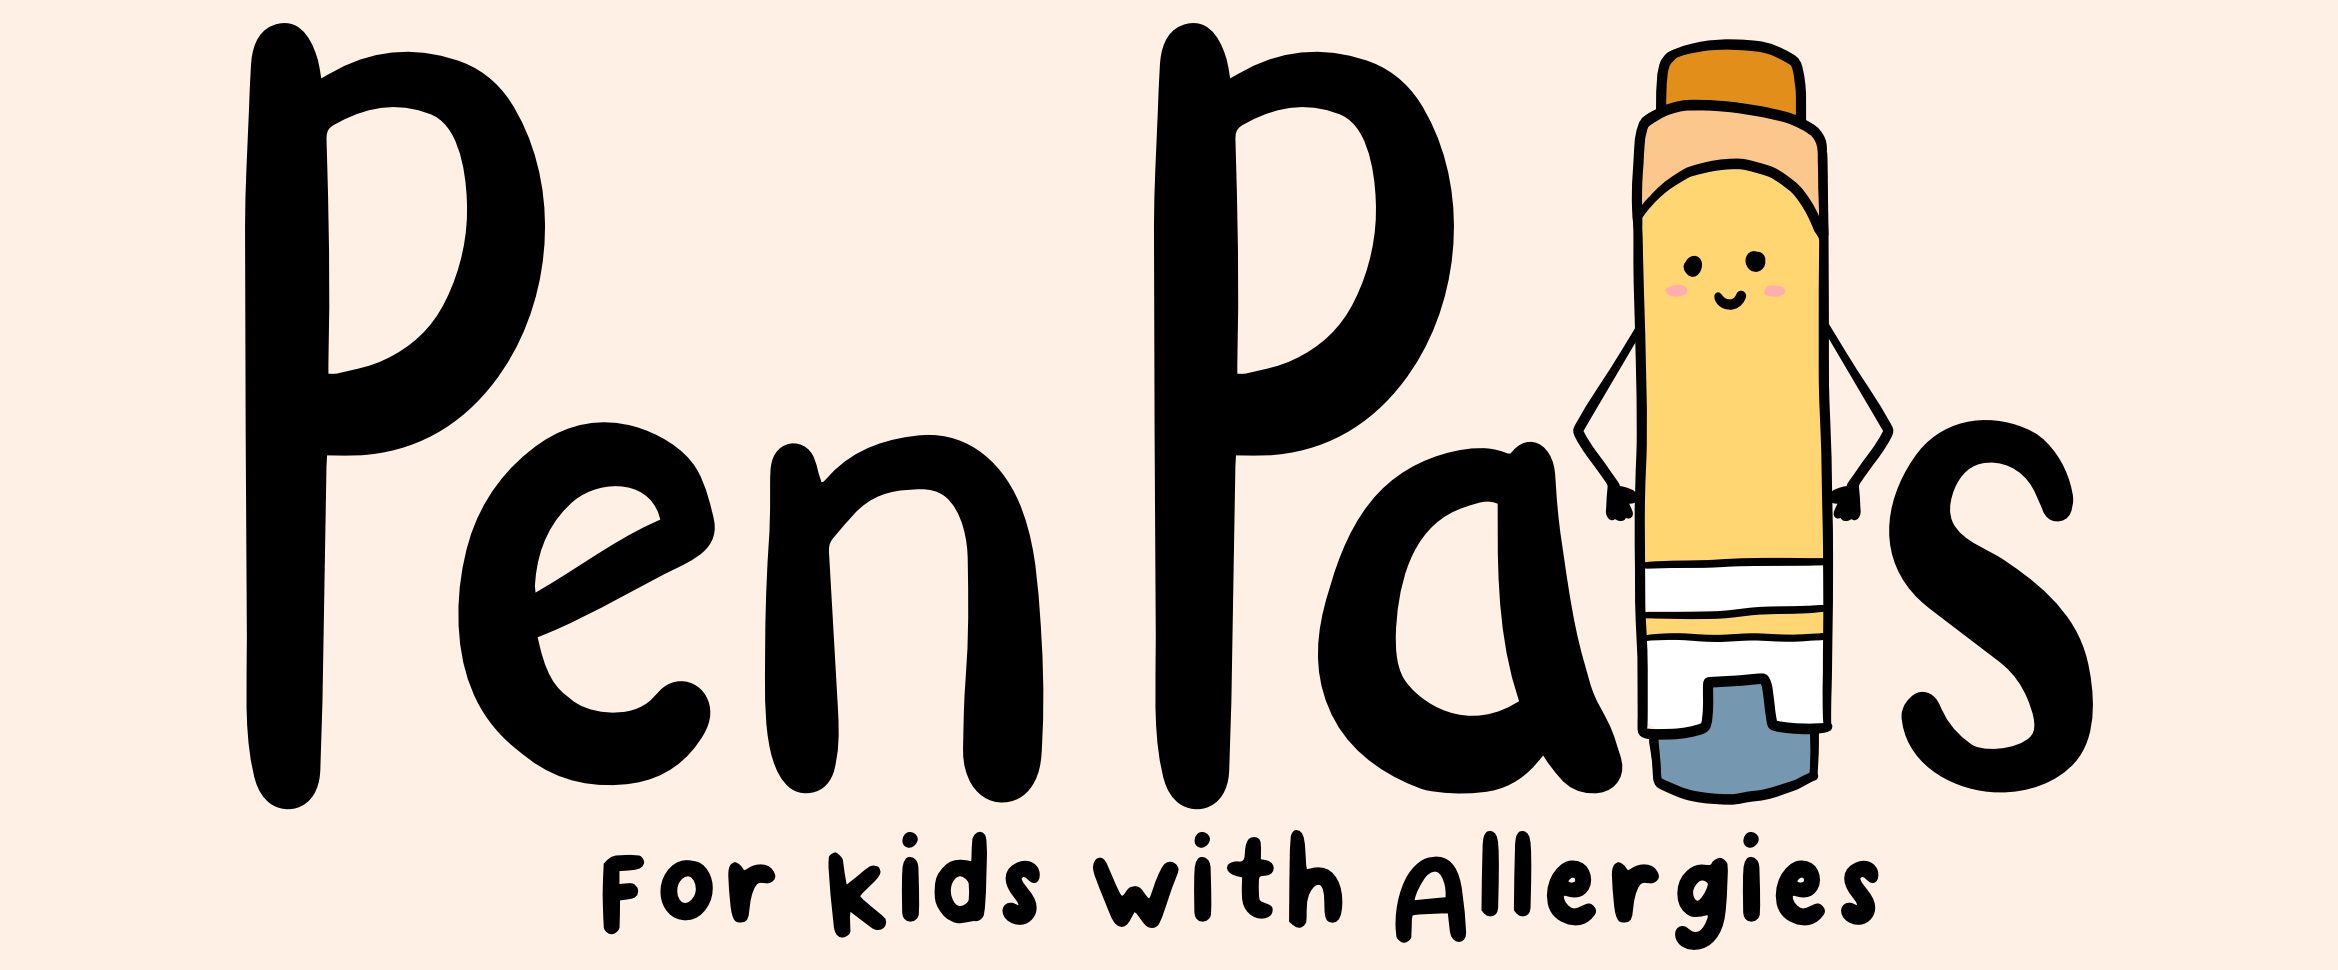 Penpals For Kids with Allergies